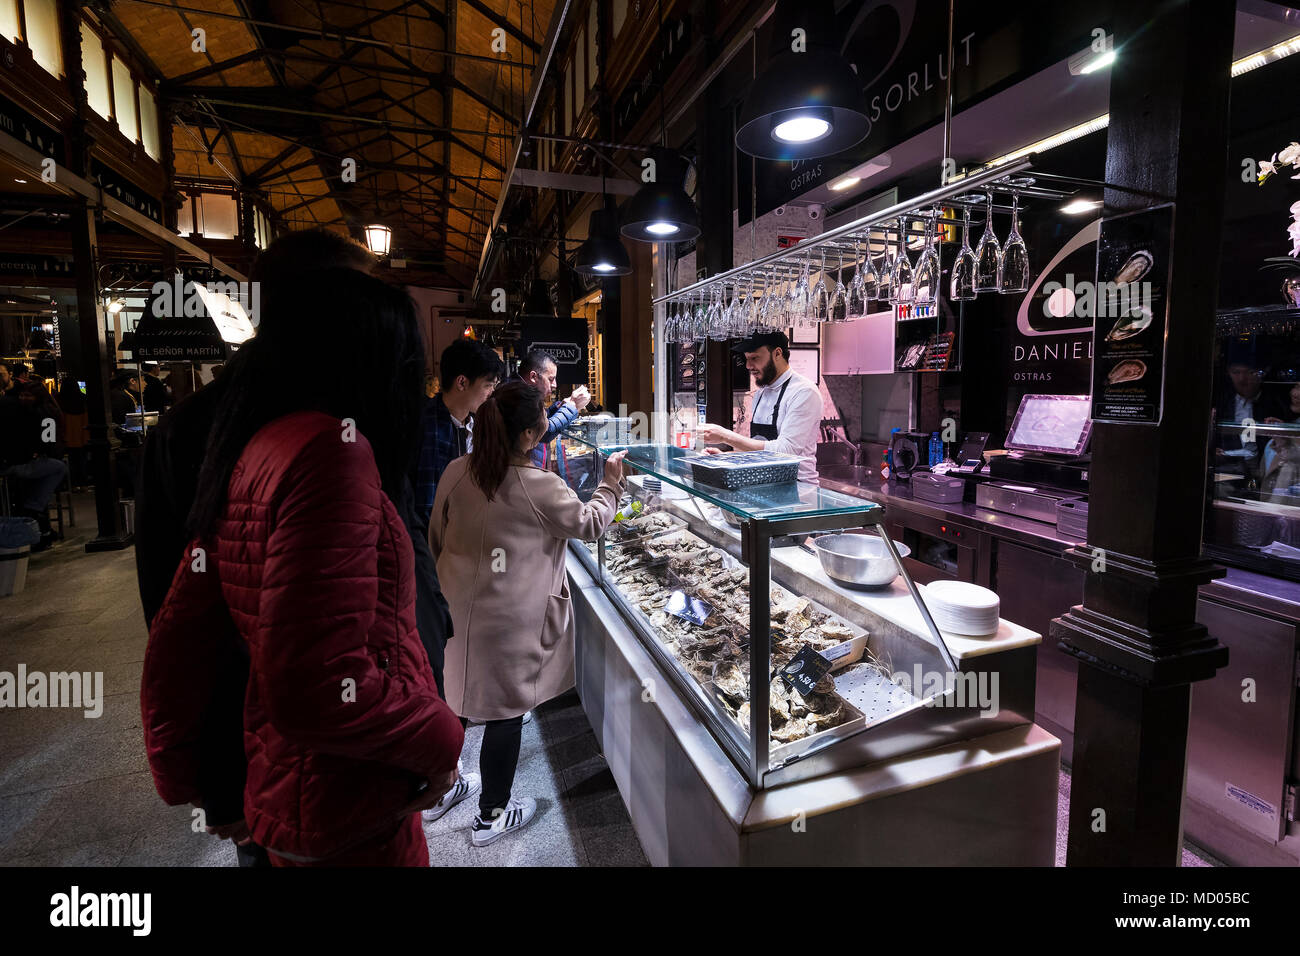 MADRID, SPAIN - 28 MARCH, 2018: Evening market of San Miguel serving customers. Stock Photo